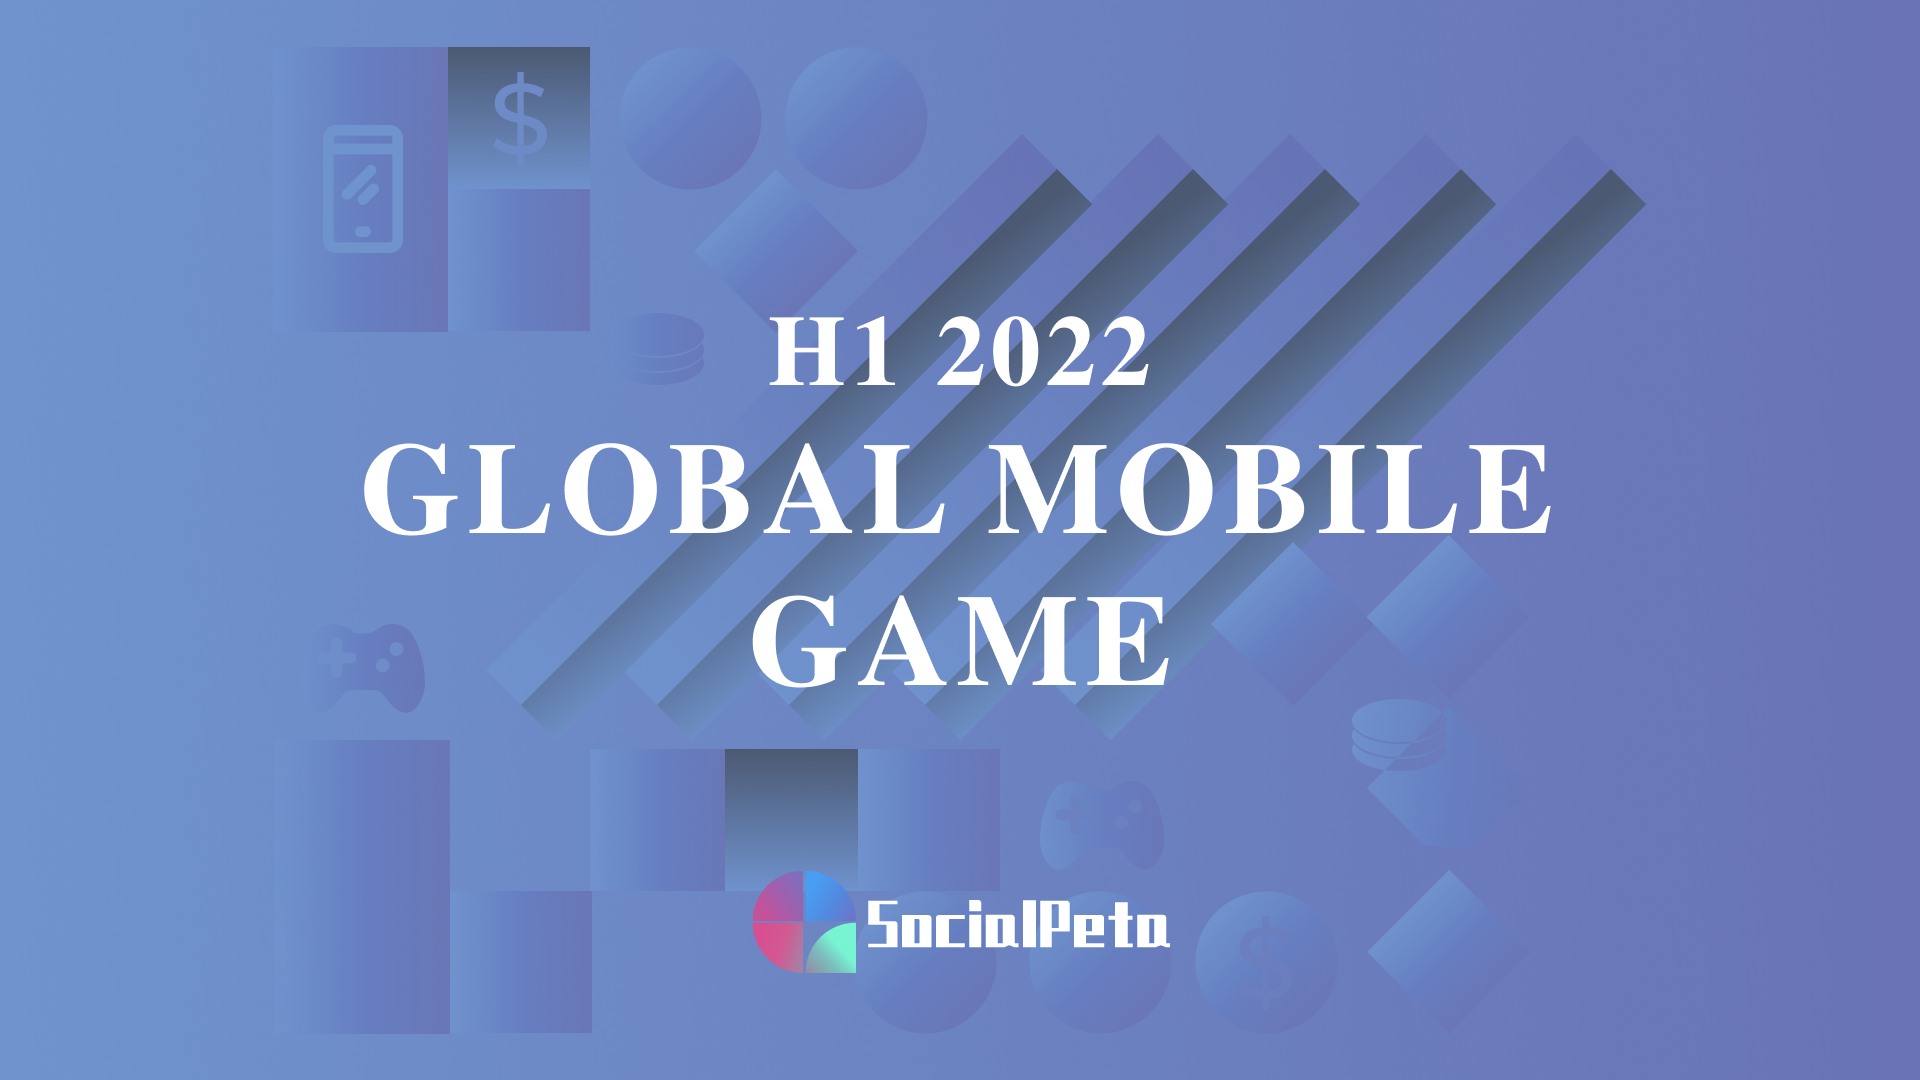 Mobile game marketing analysis report for the first half of 2022 by SocialPeta